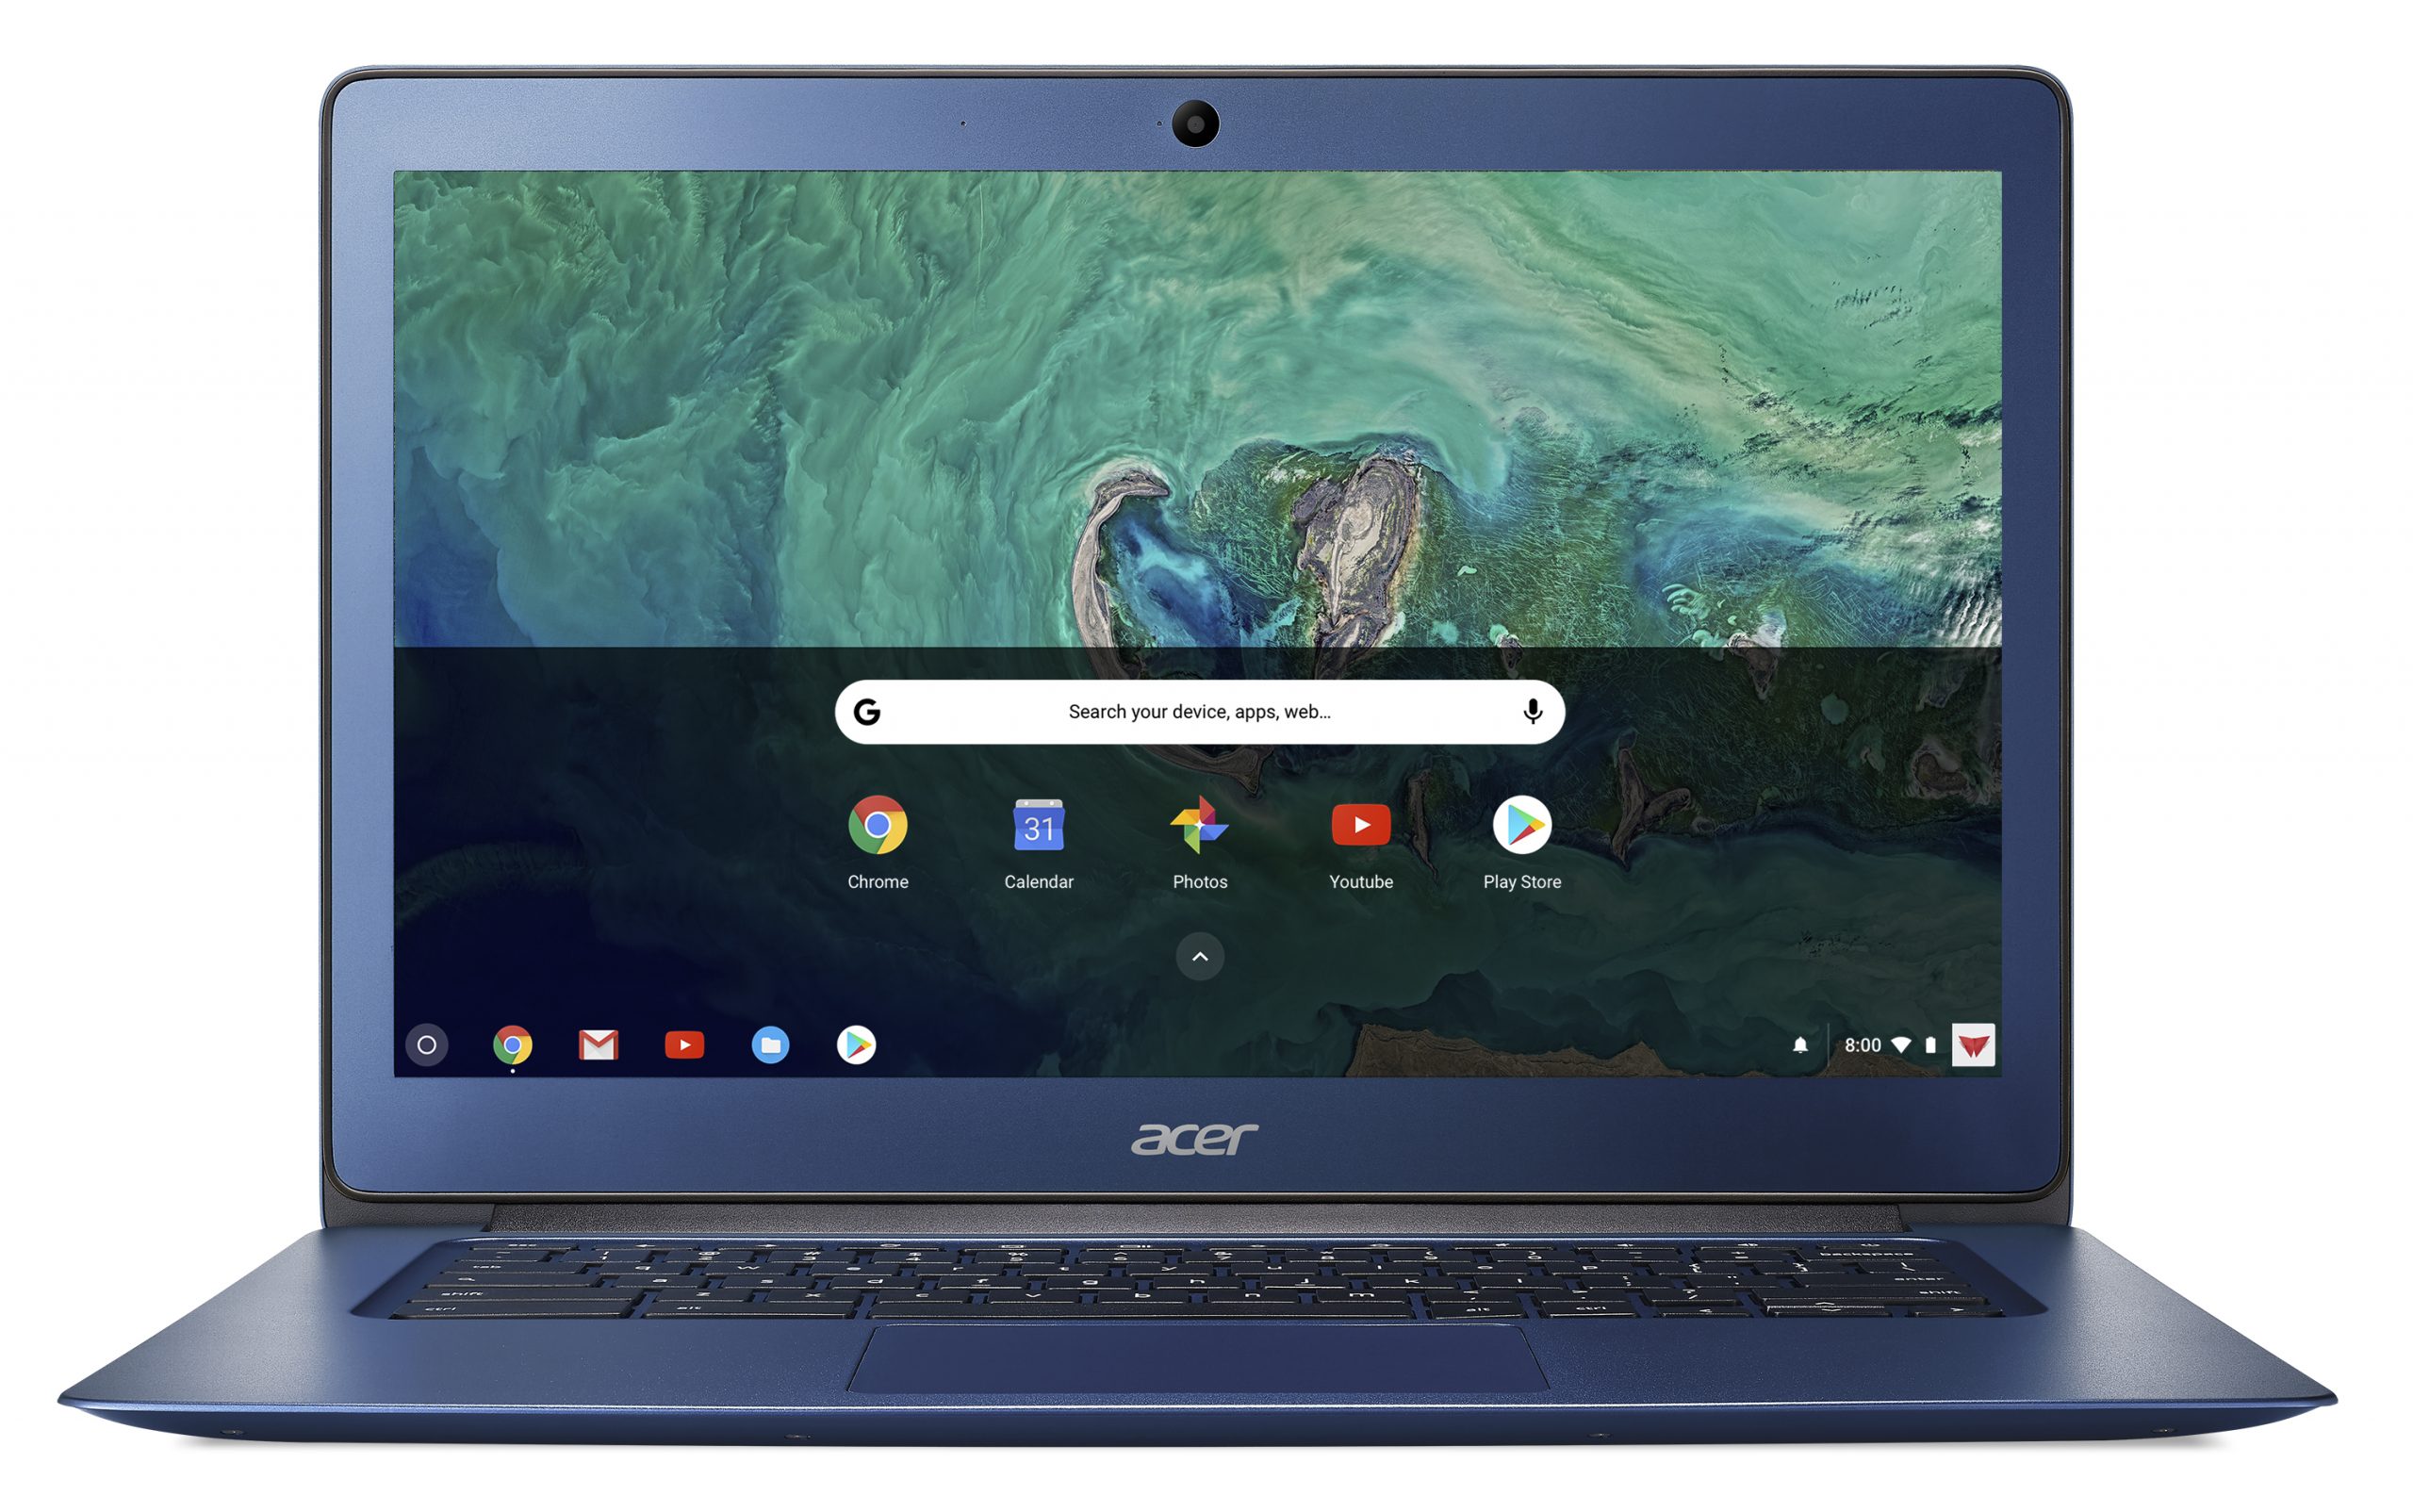 Acer Chromebook 14 (CB3-431) - Specs, Tests, and Prices